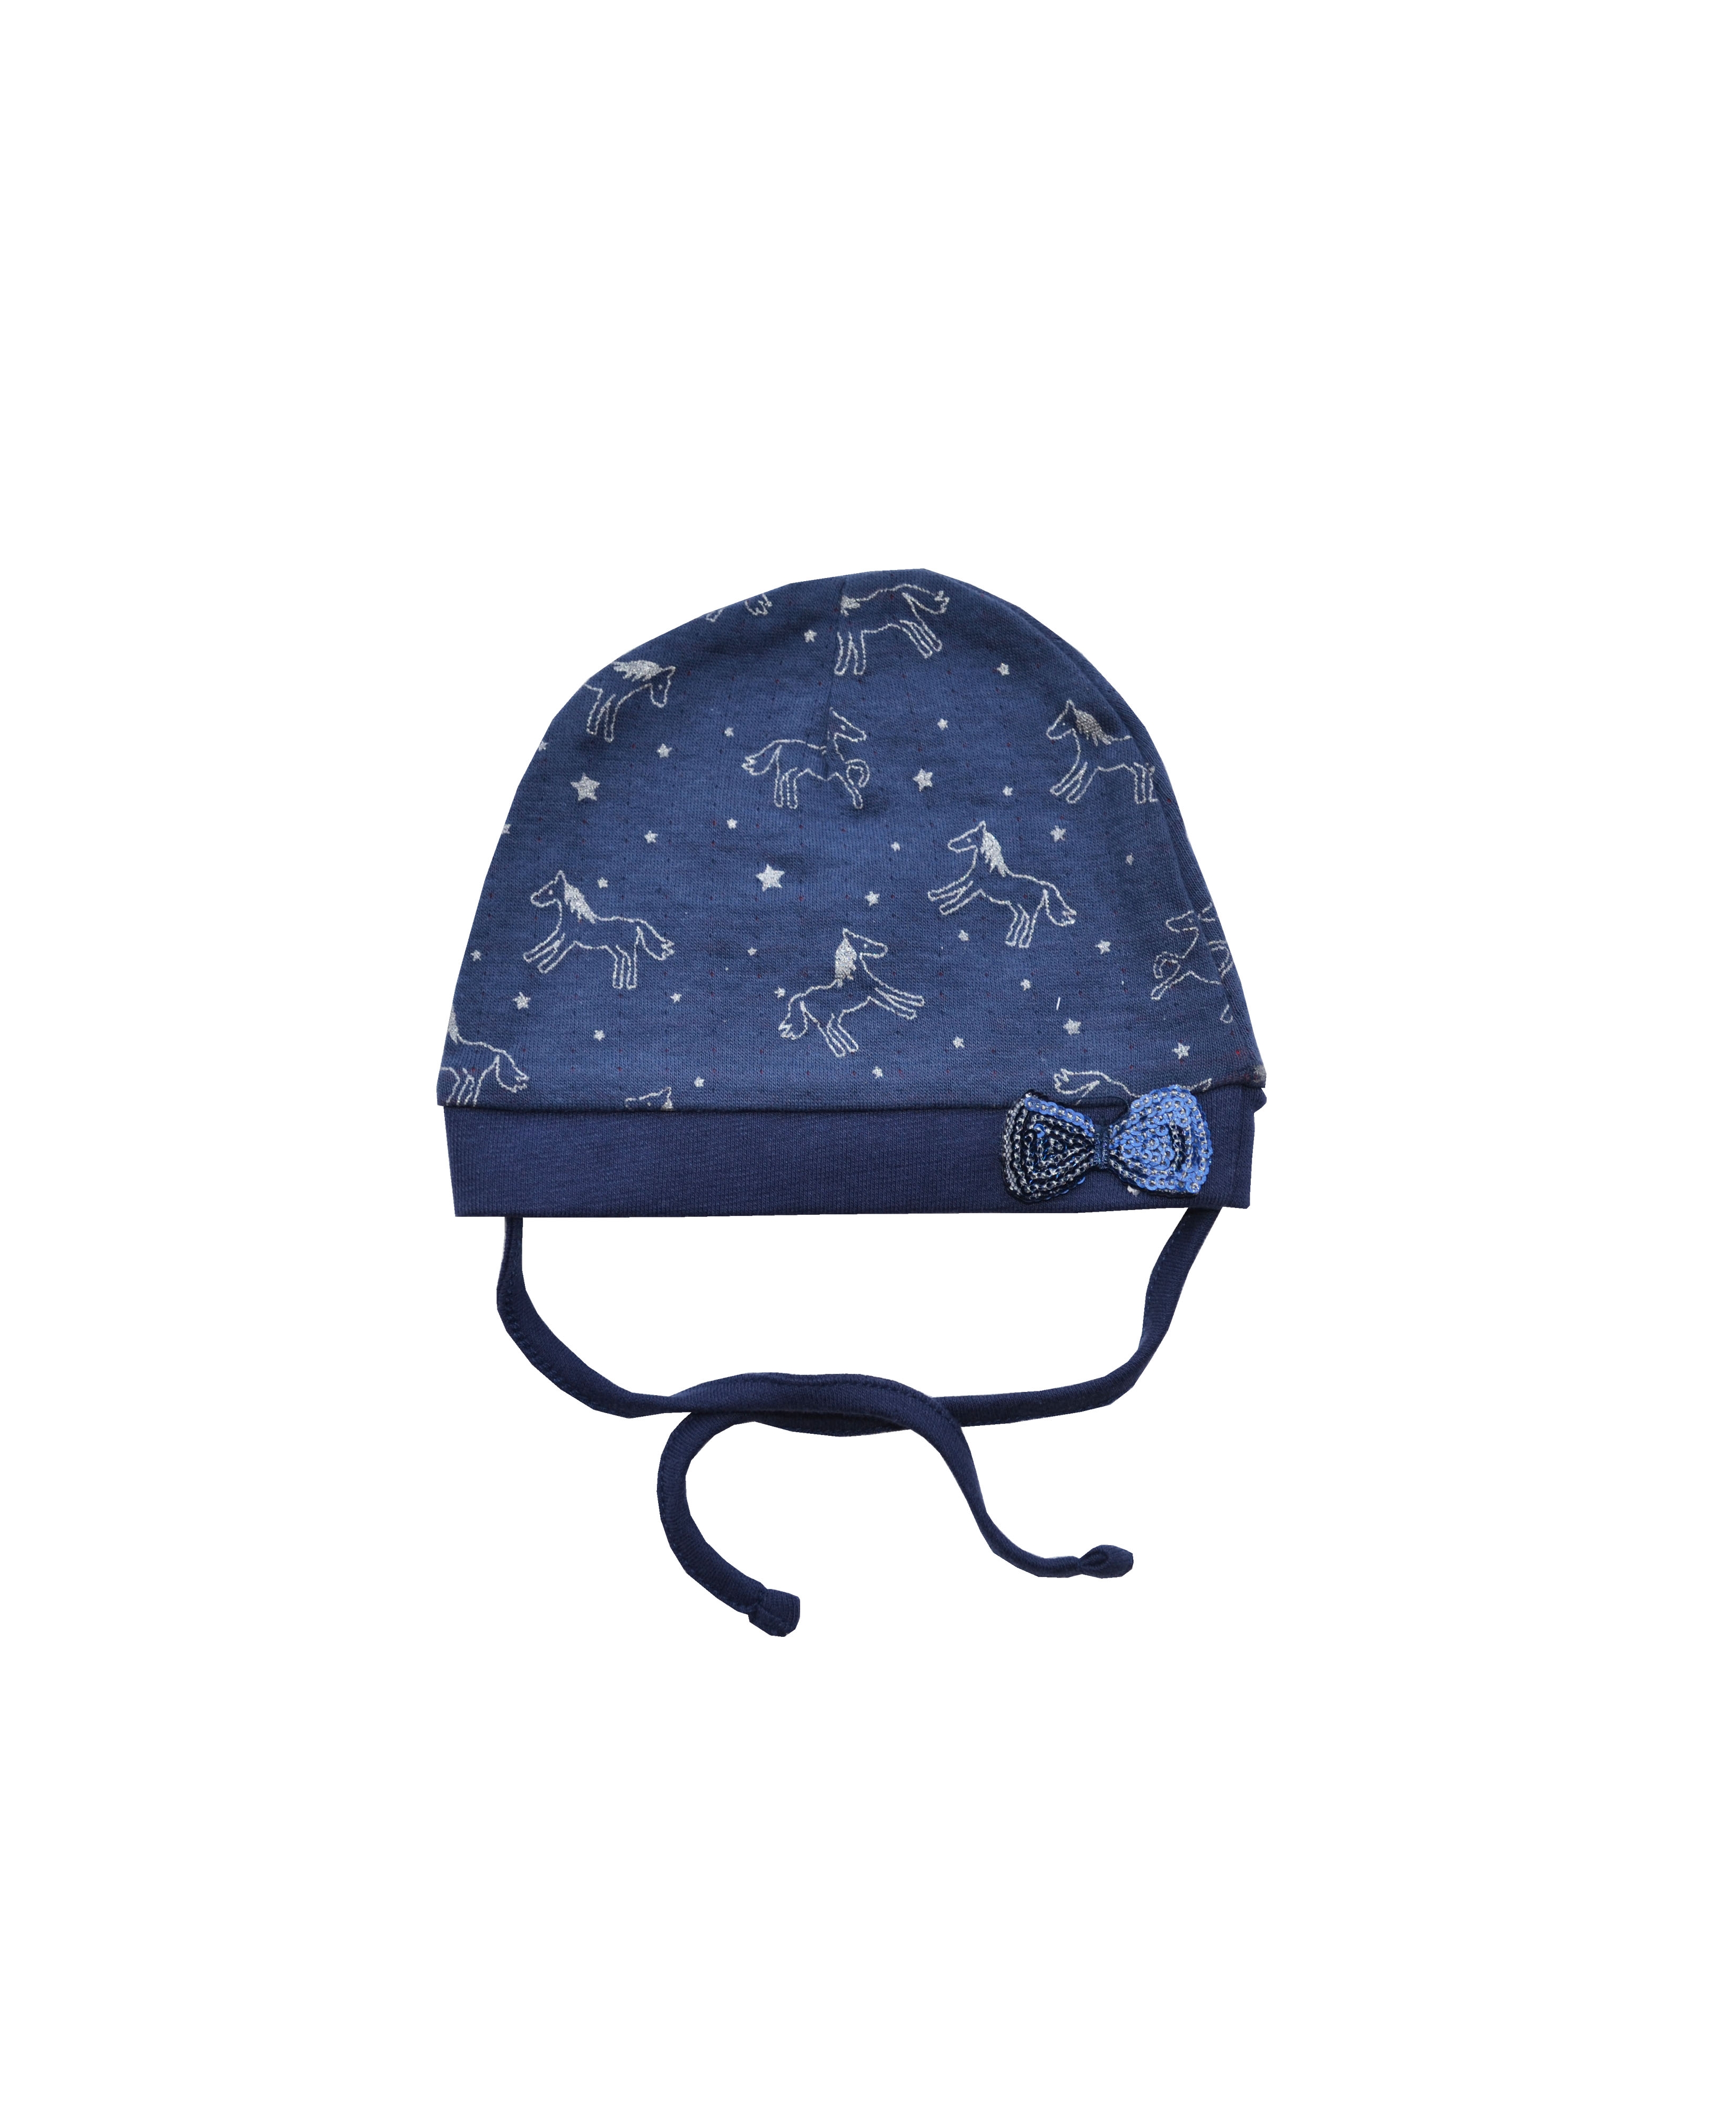 Babeez | Girls Navy Cap with Horse Print and Sequence Bow (100% Cotton Interlock) undefined